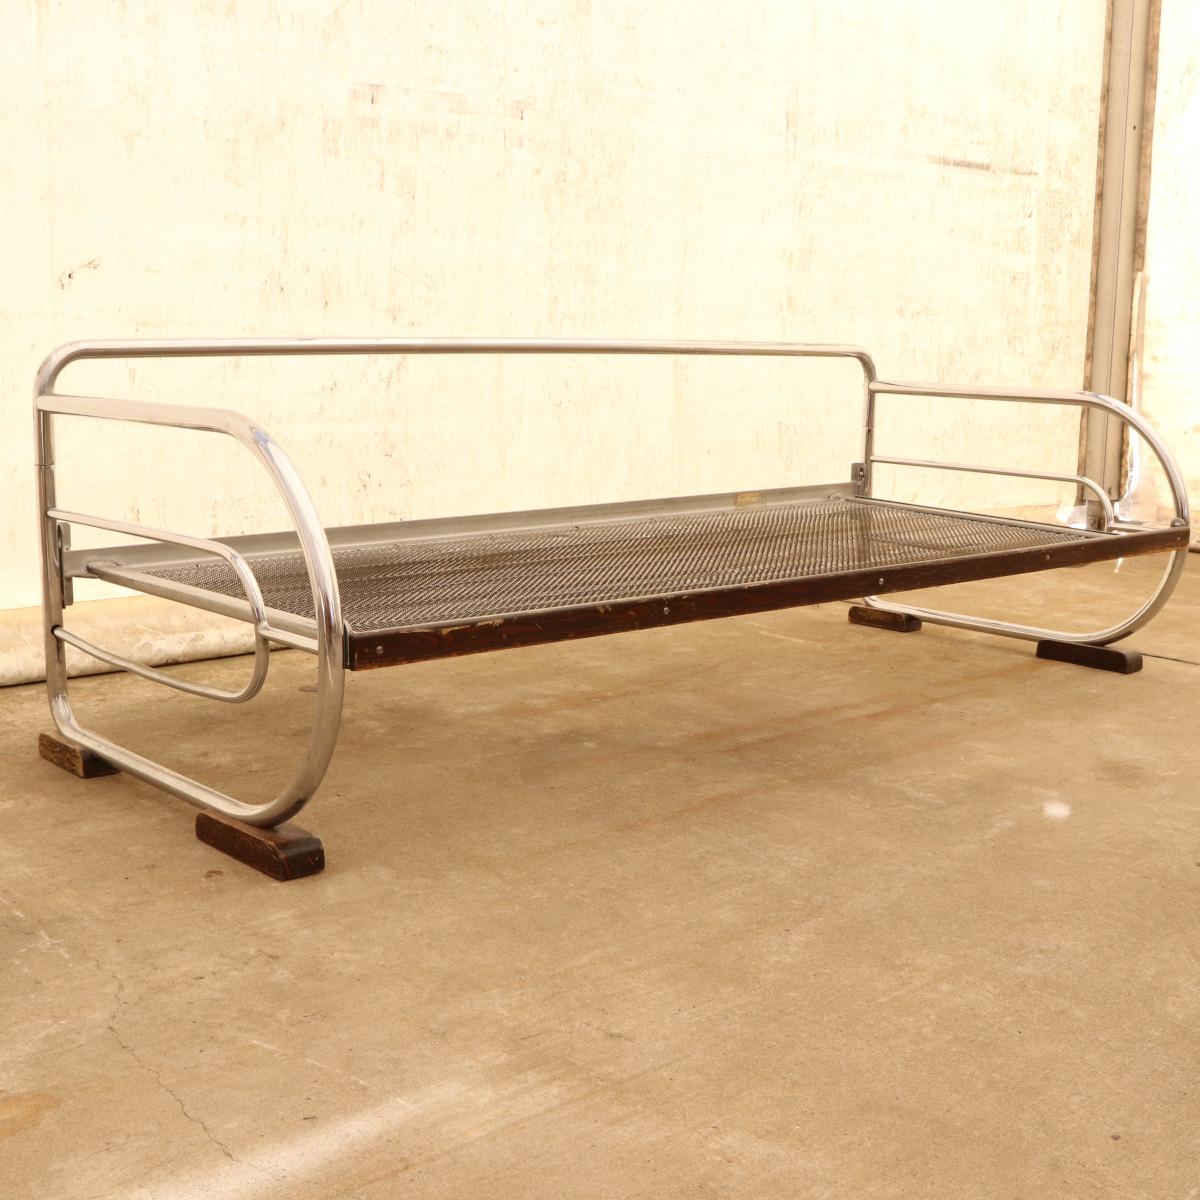 Chromed, tubular steel sofa from the Bauhaus period, 1930s, Bohemia. Made by Hynek Gottwald company. Chrome is in good vintage condition, showing slight signs of aging and using.
It has four wooden legs.